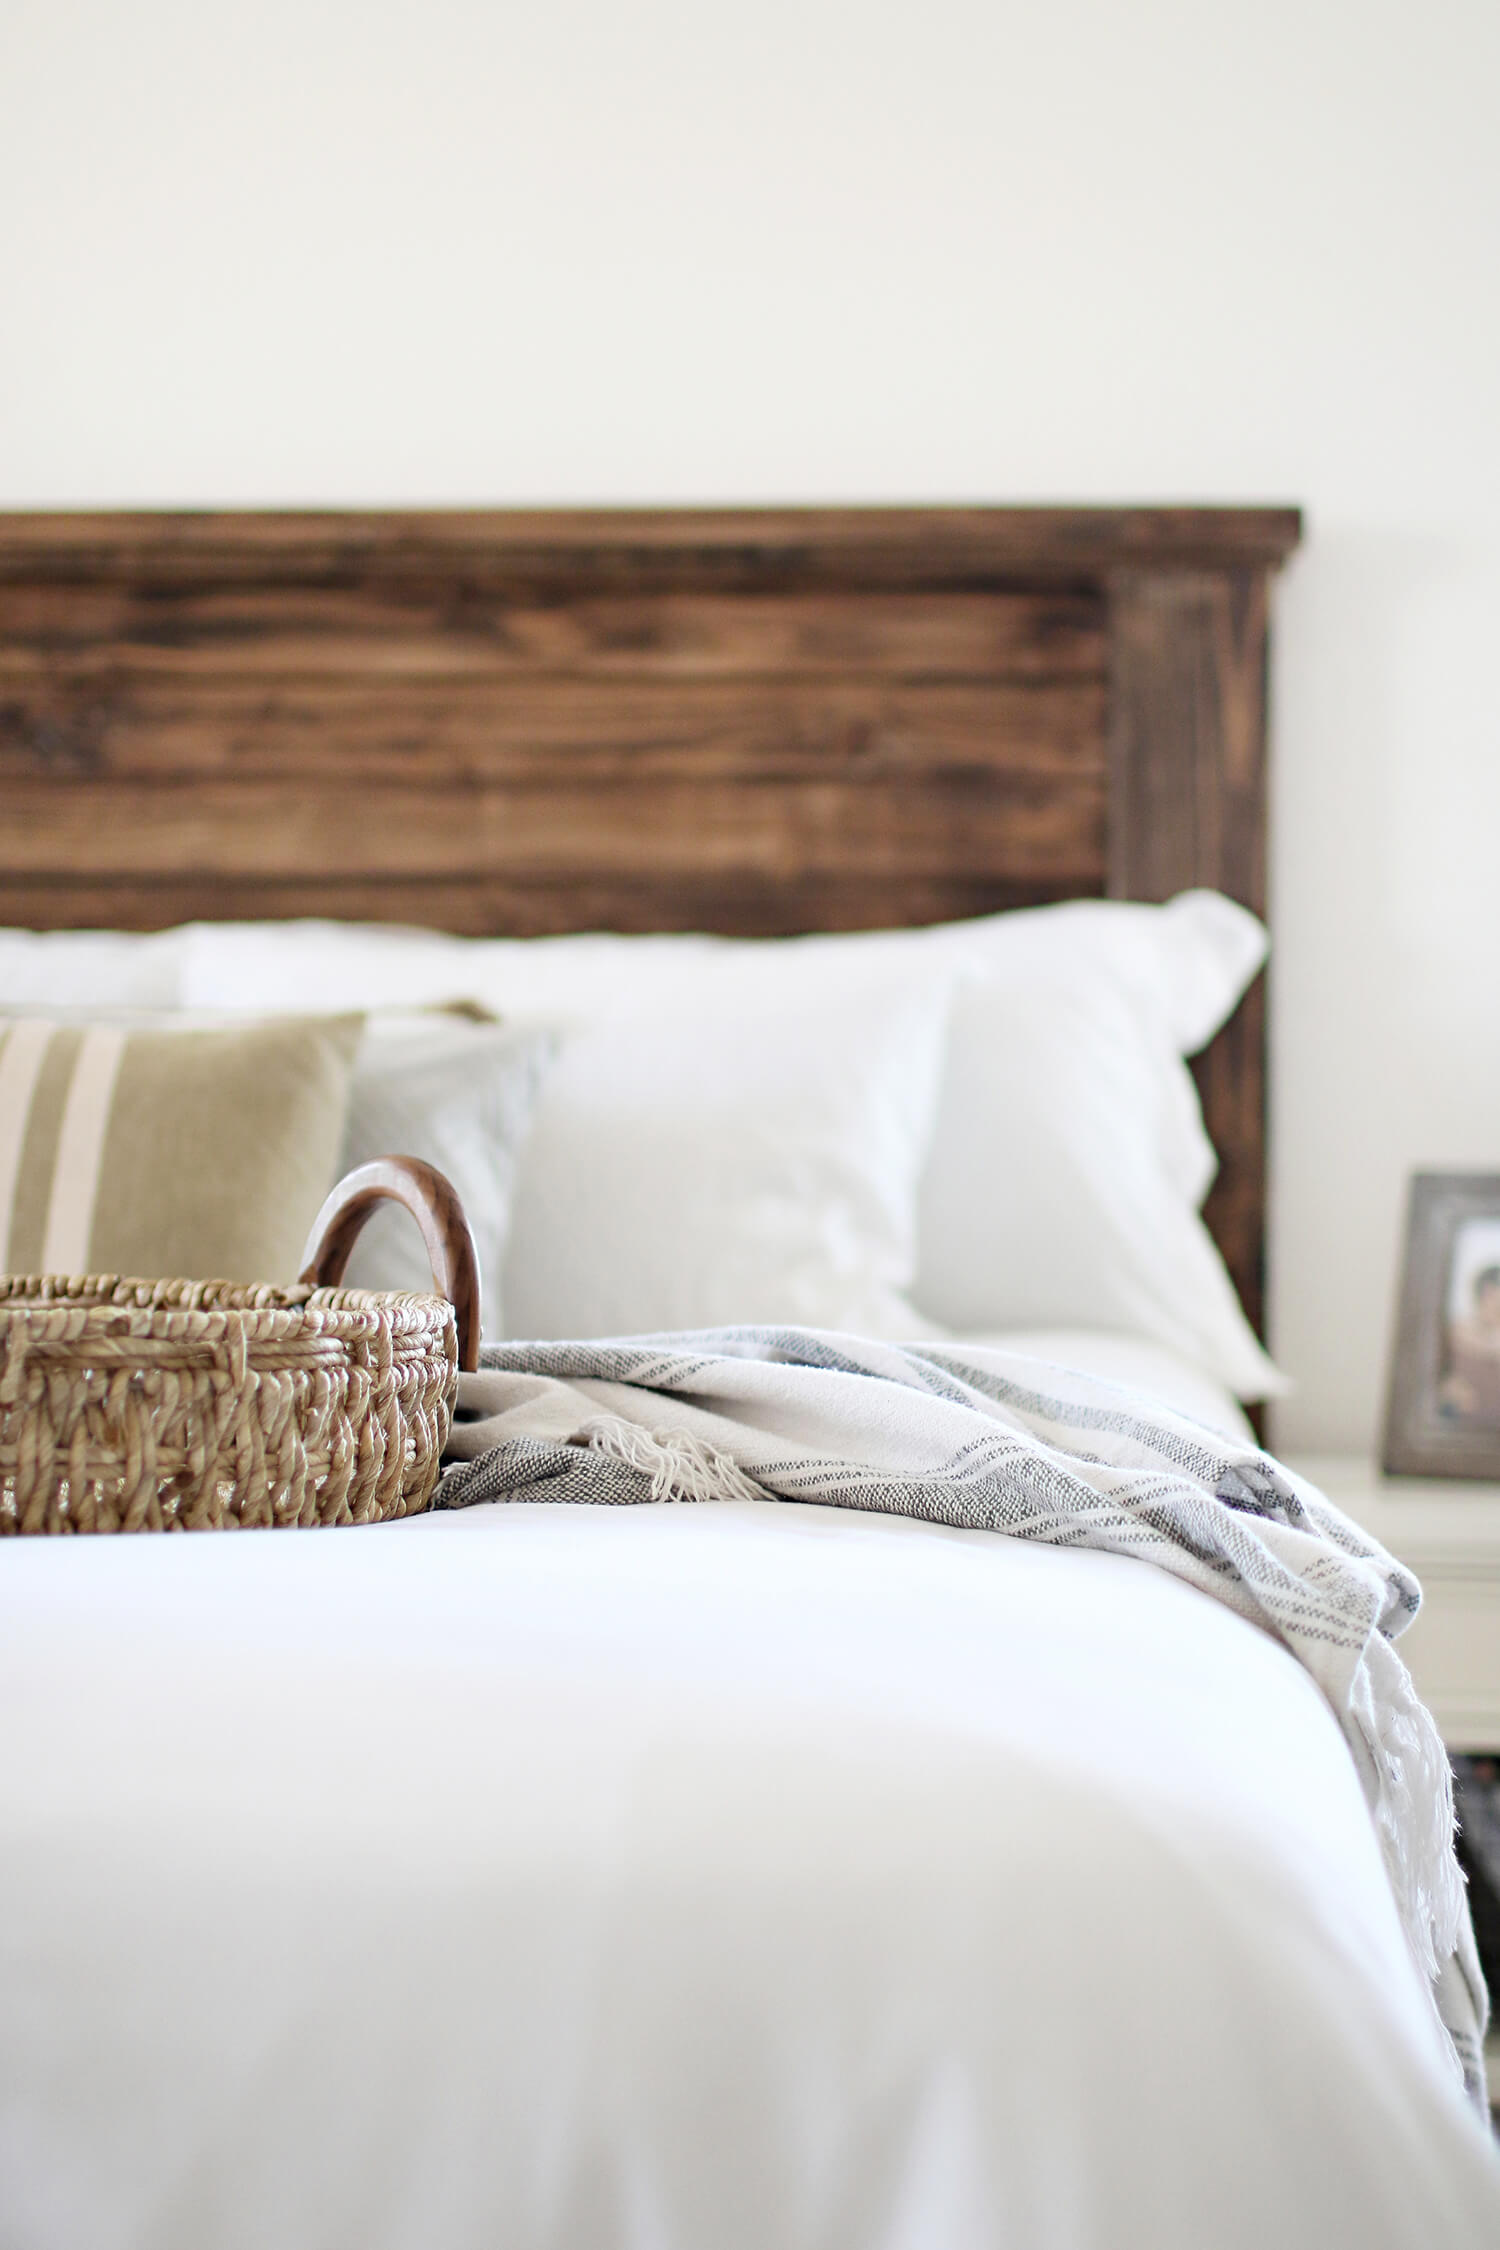 Diy Farmhouse Headboard Project, Building A Headboard For King Size Bed